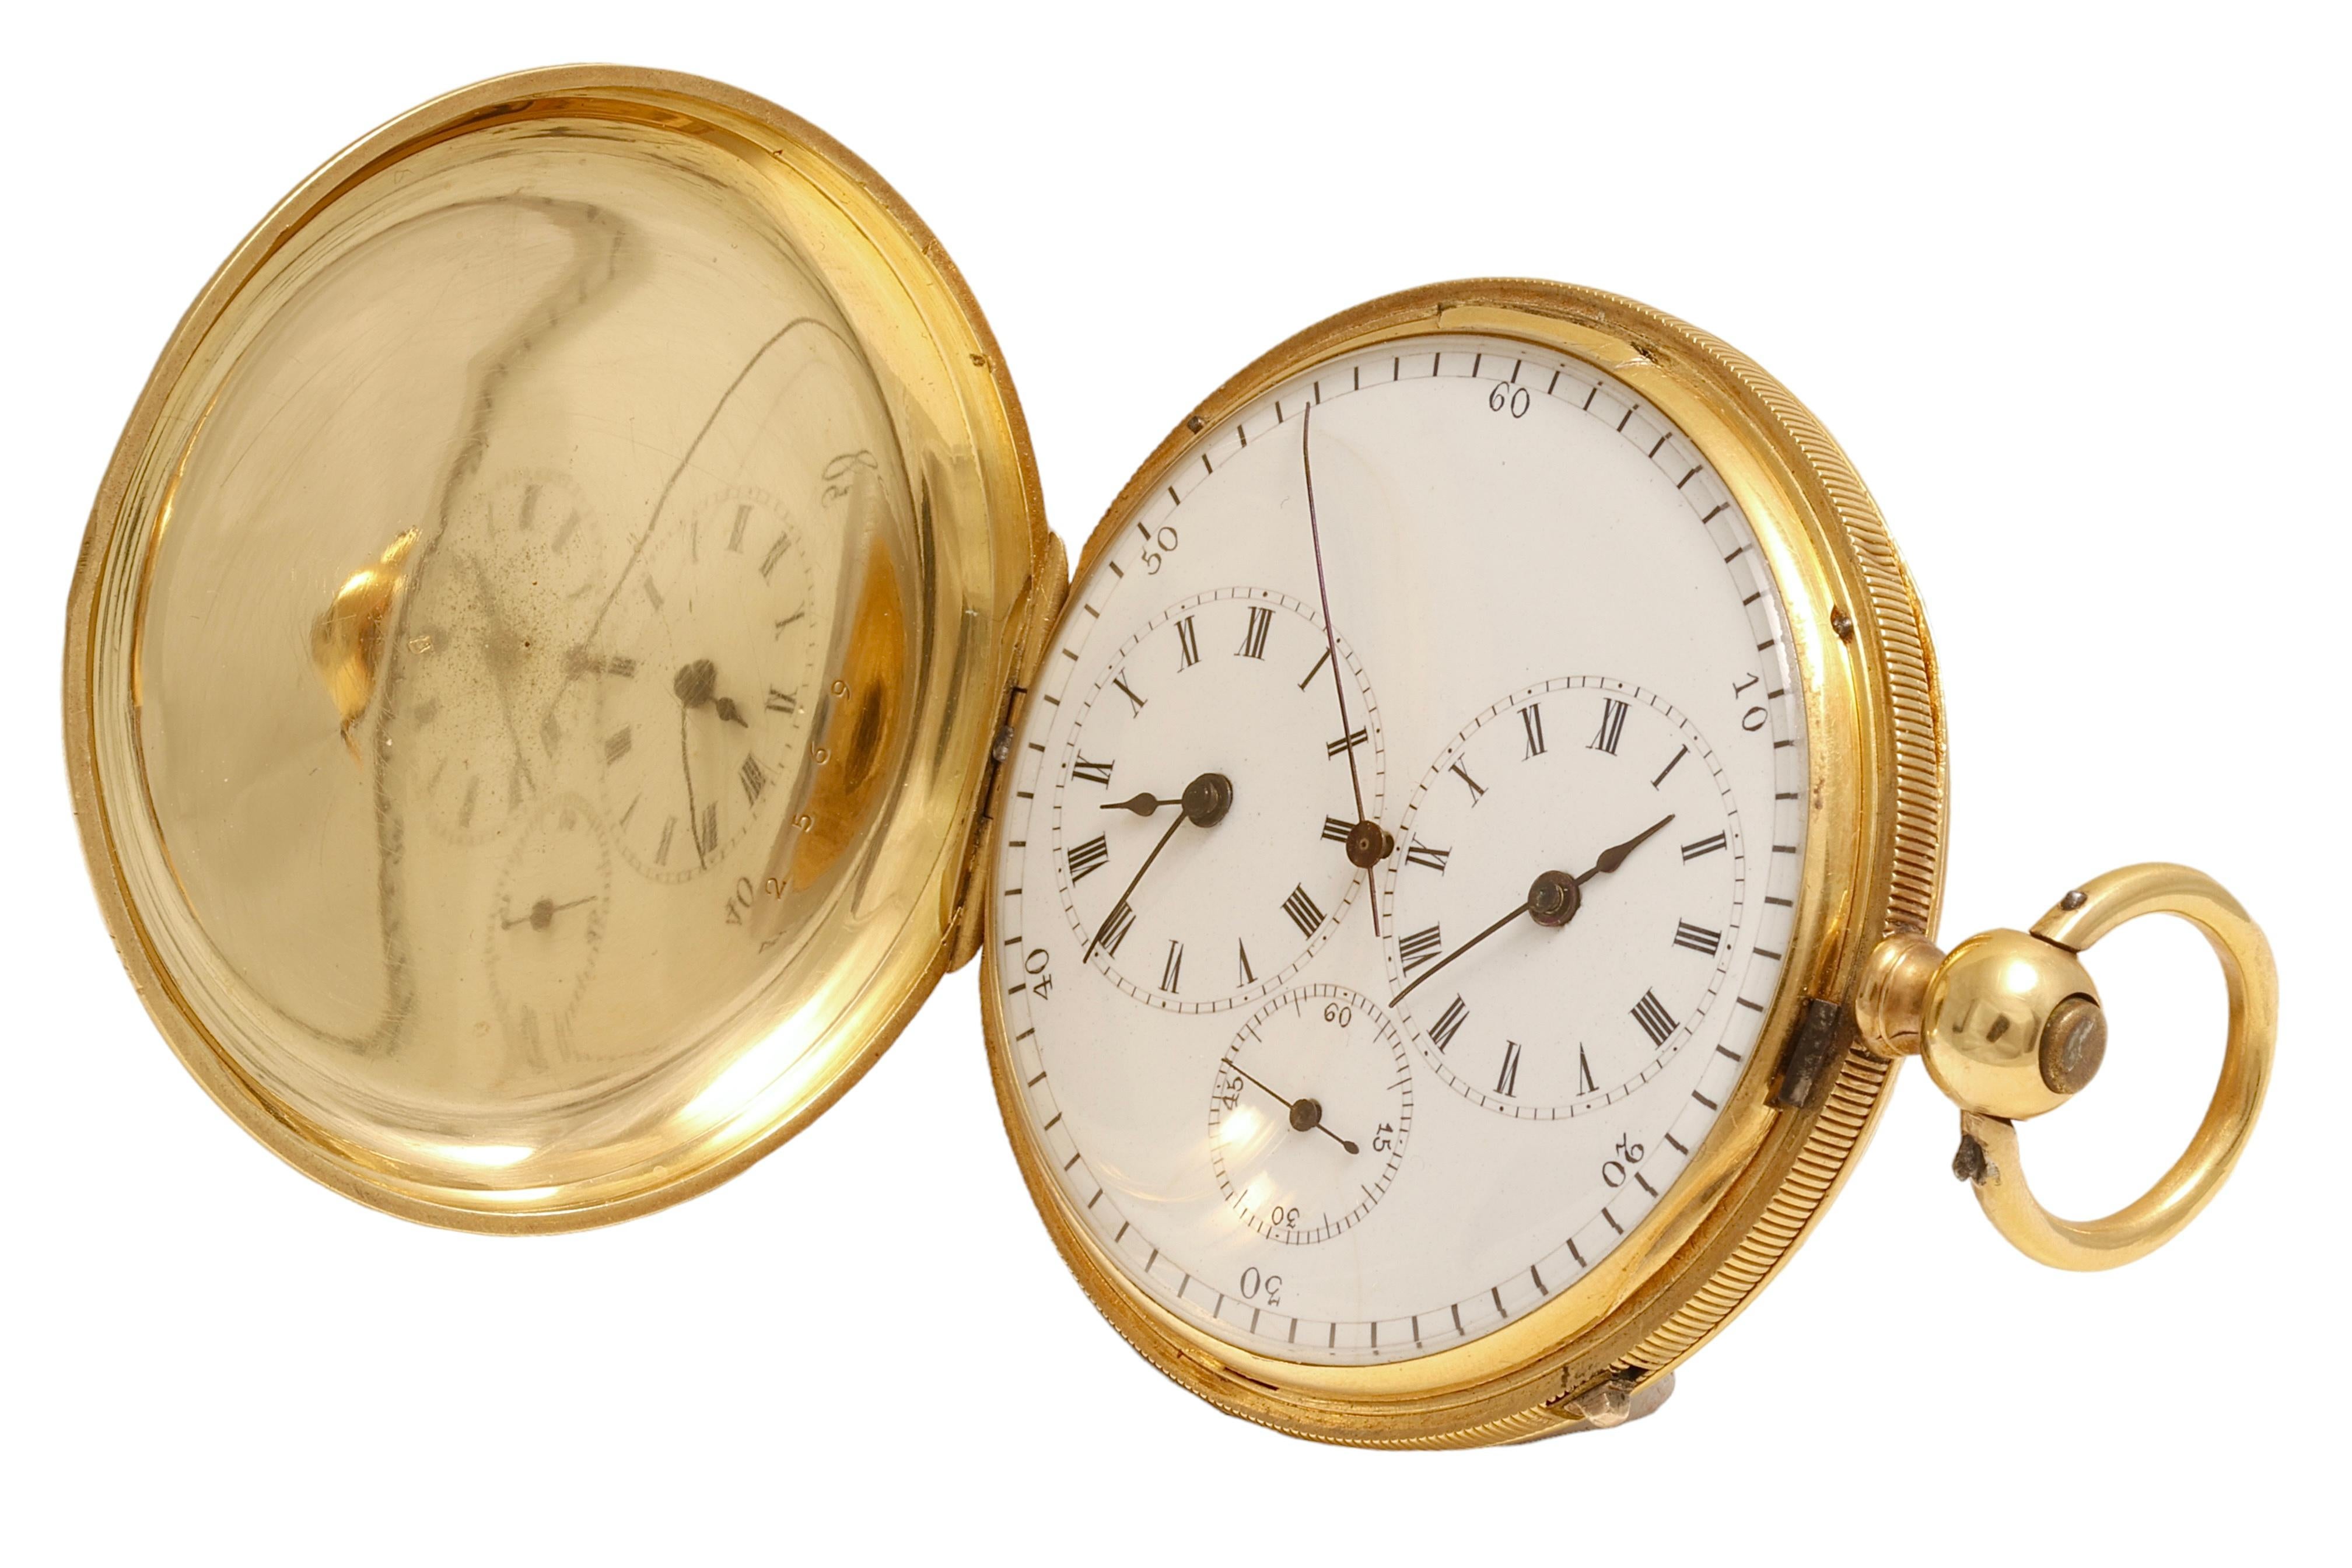 18 kt. Gold Dual Time, Dead Beat Second, Double Barrel Pocket Watch A.Perret

Movement: Mechanical with manual winding

Functions: hours,minutes, Dead Second Beat  and sweep second; Dual Time

Dial : Enamel, a few hairlines due to age

Case: 18 kt